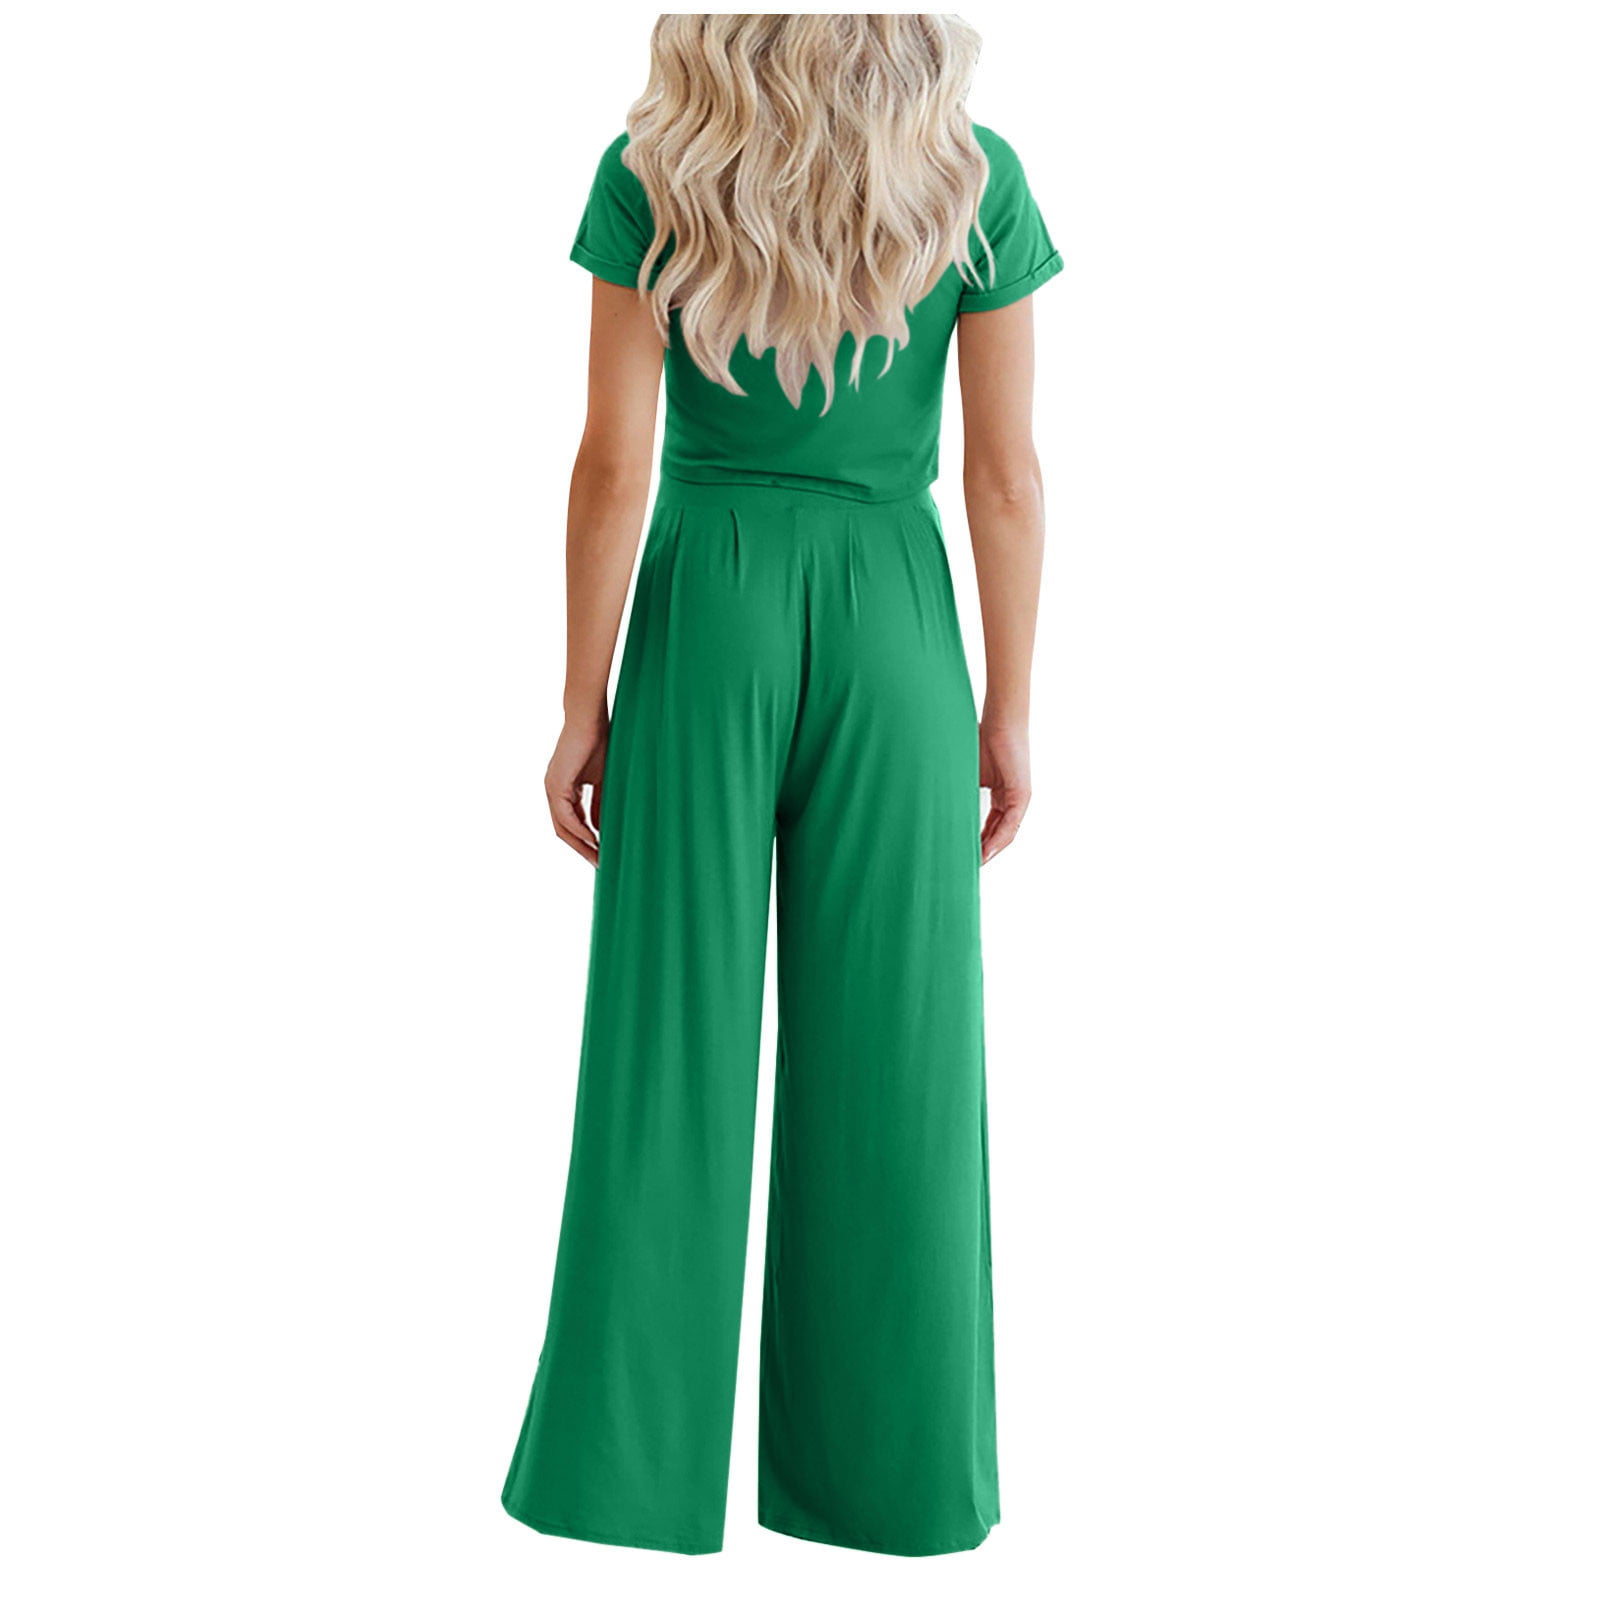 Wozhidaose Two Piece Outfits for Women Womens Solid Two Piece Off Shoulder  Short Sleeve Suit Crop Top High Waist Pants Set Pants for Women